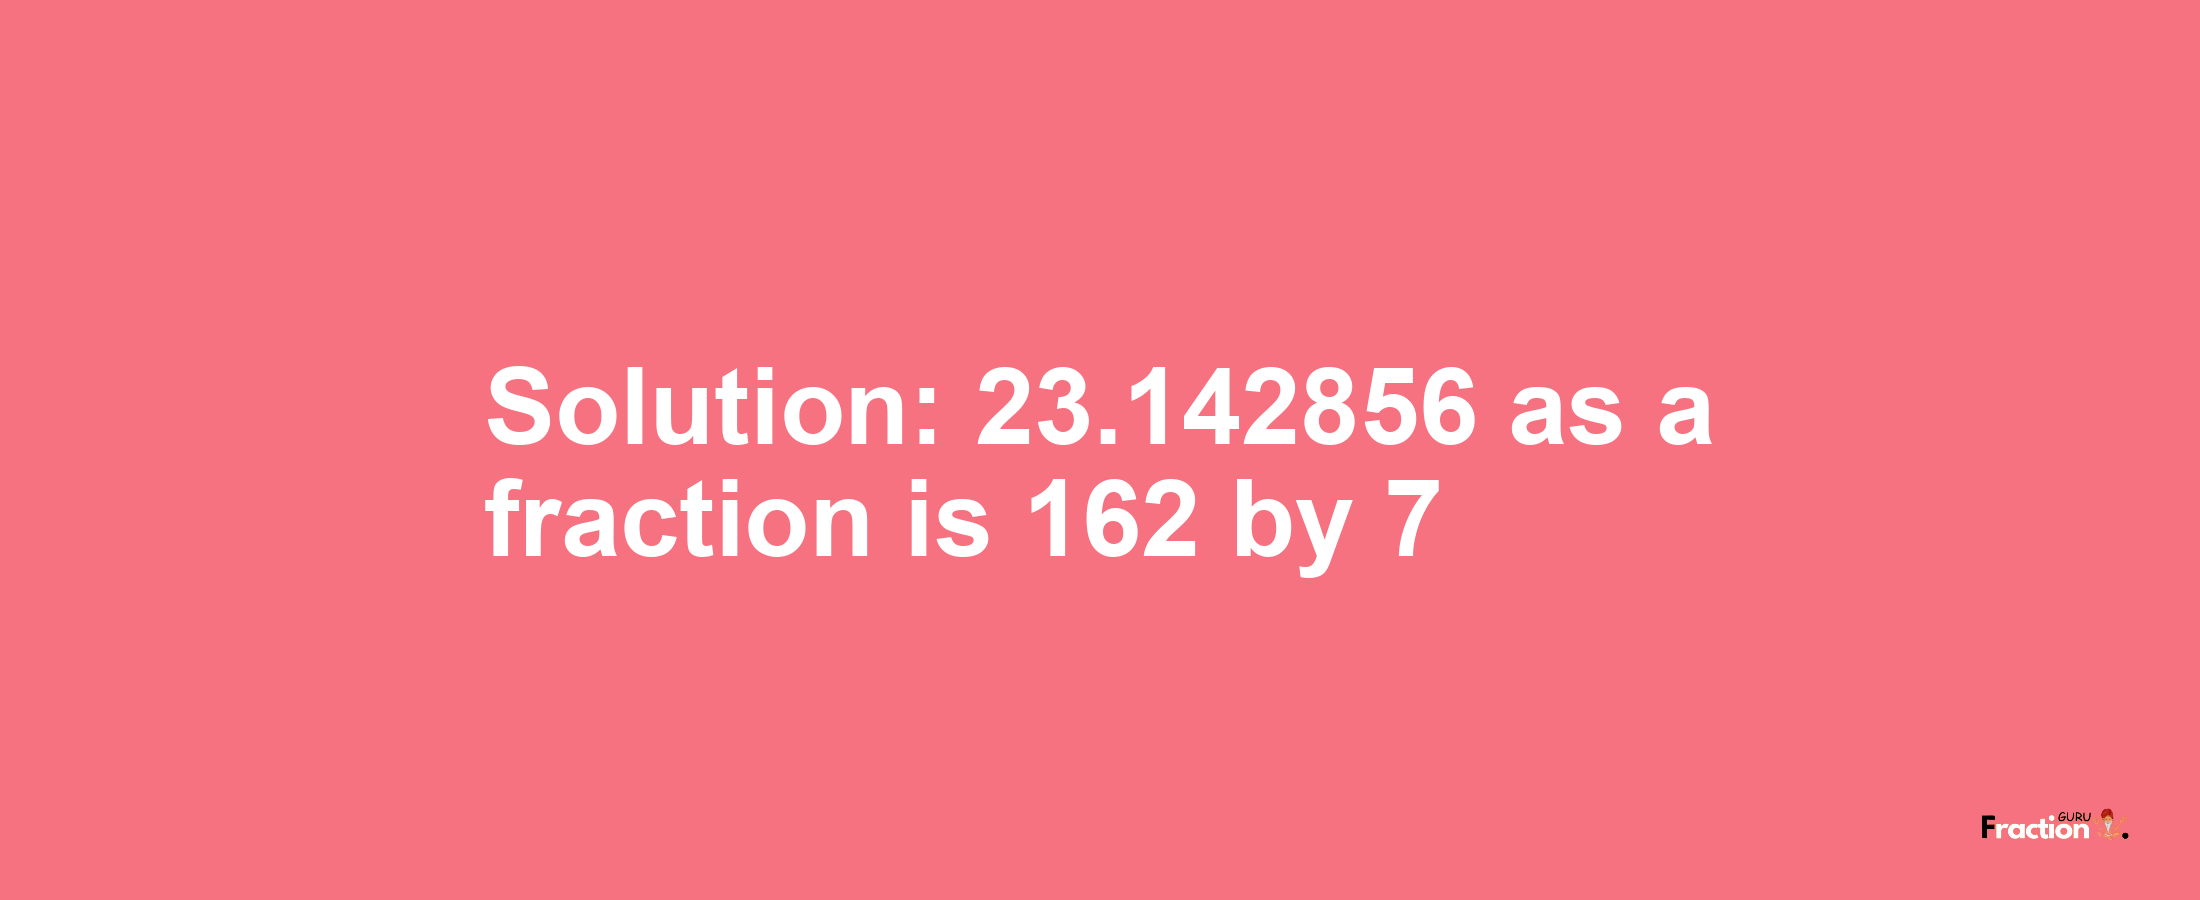 Solution:23.142856 as a fraction is 162/7